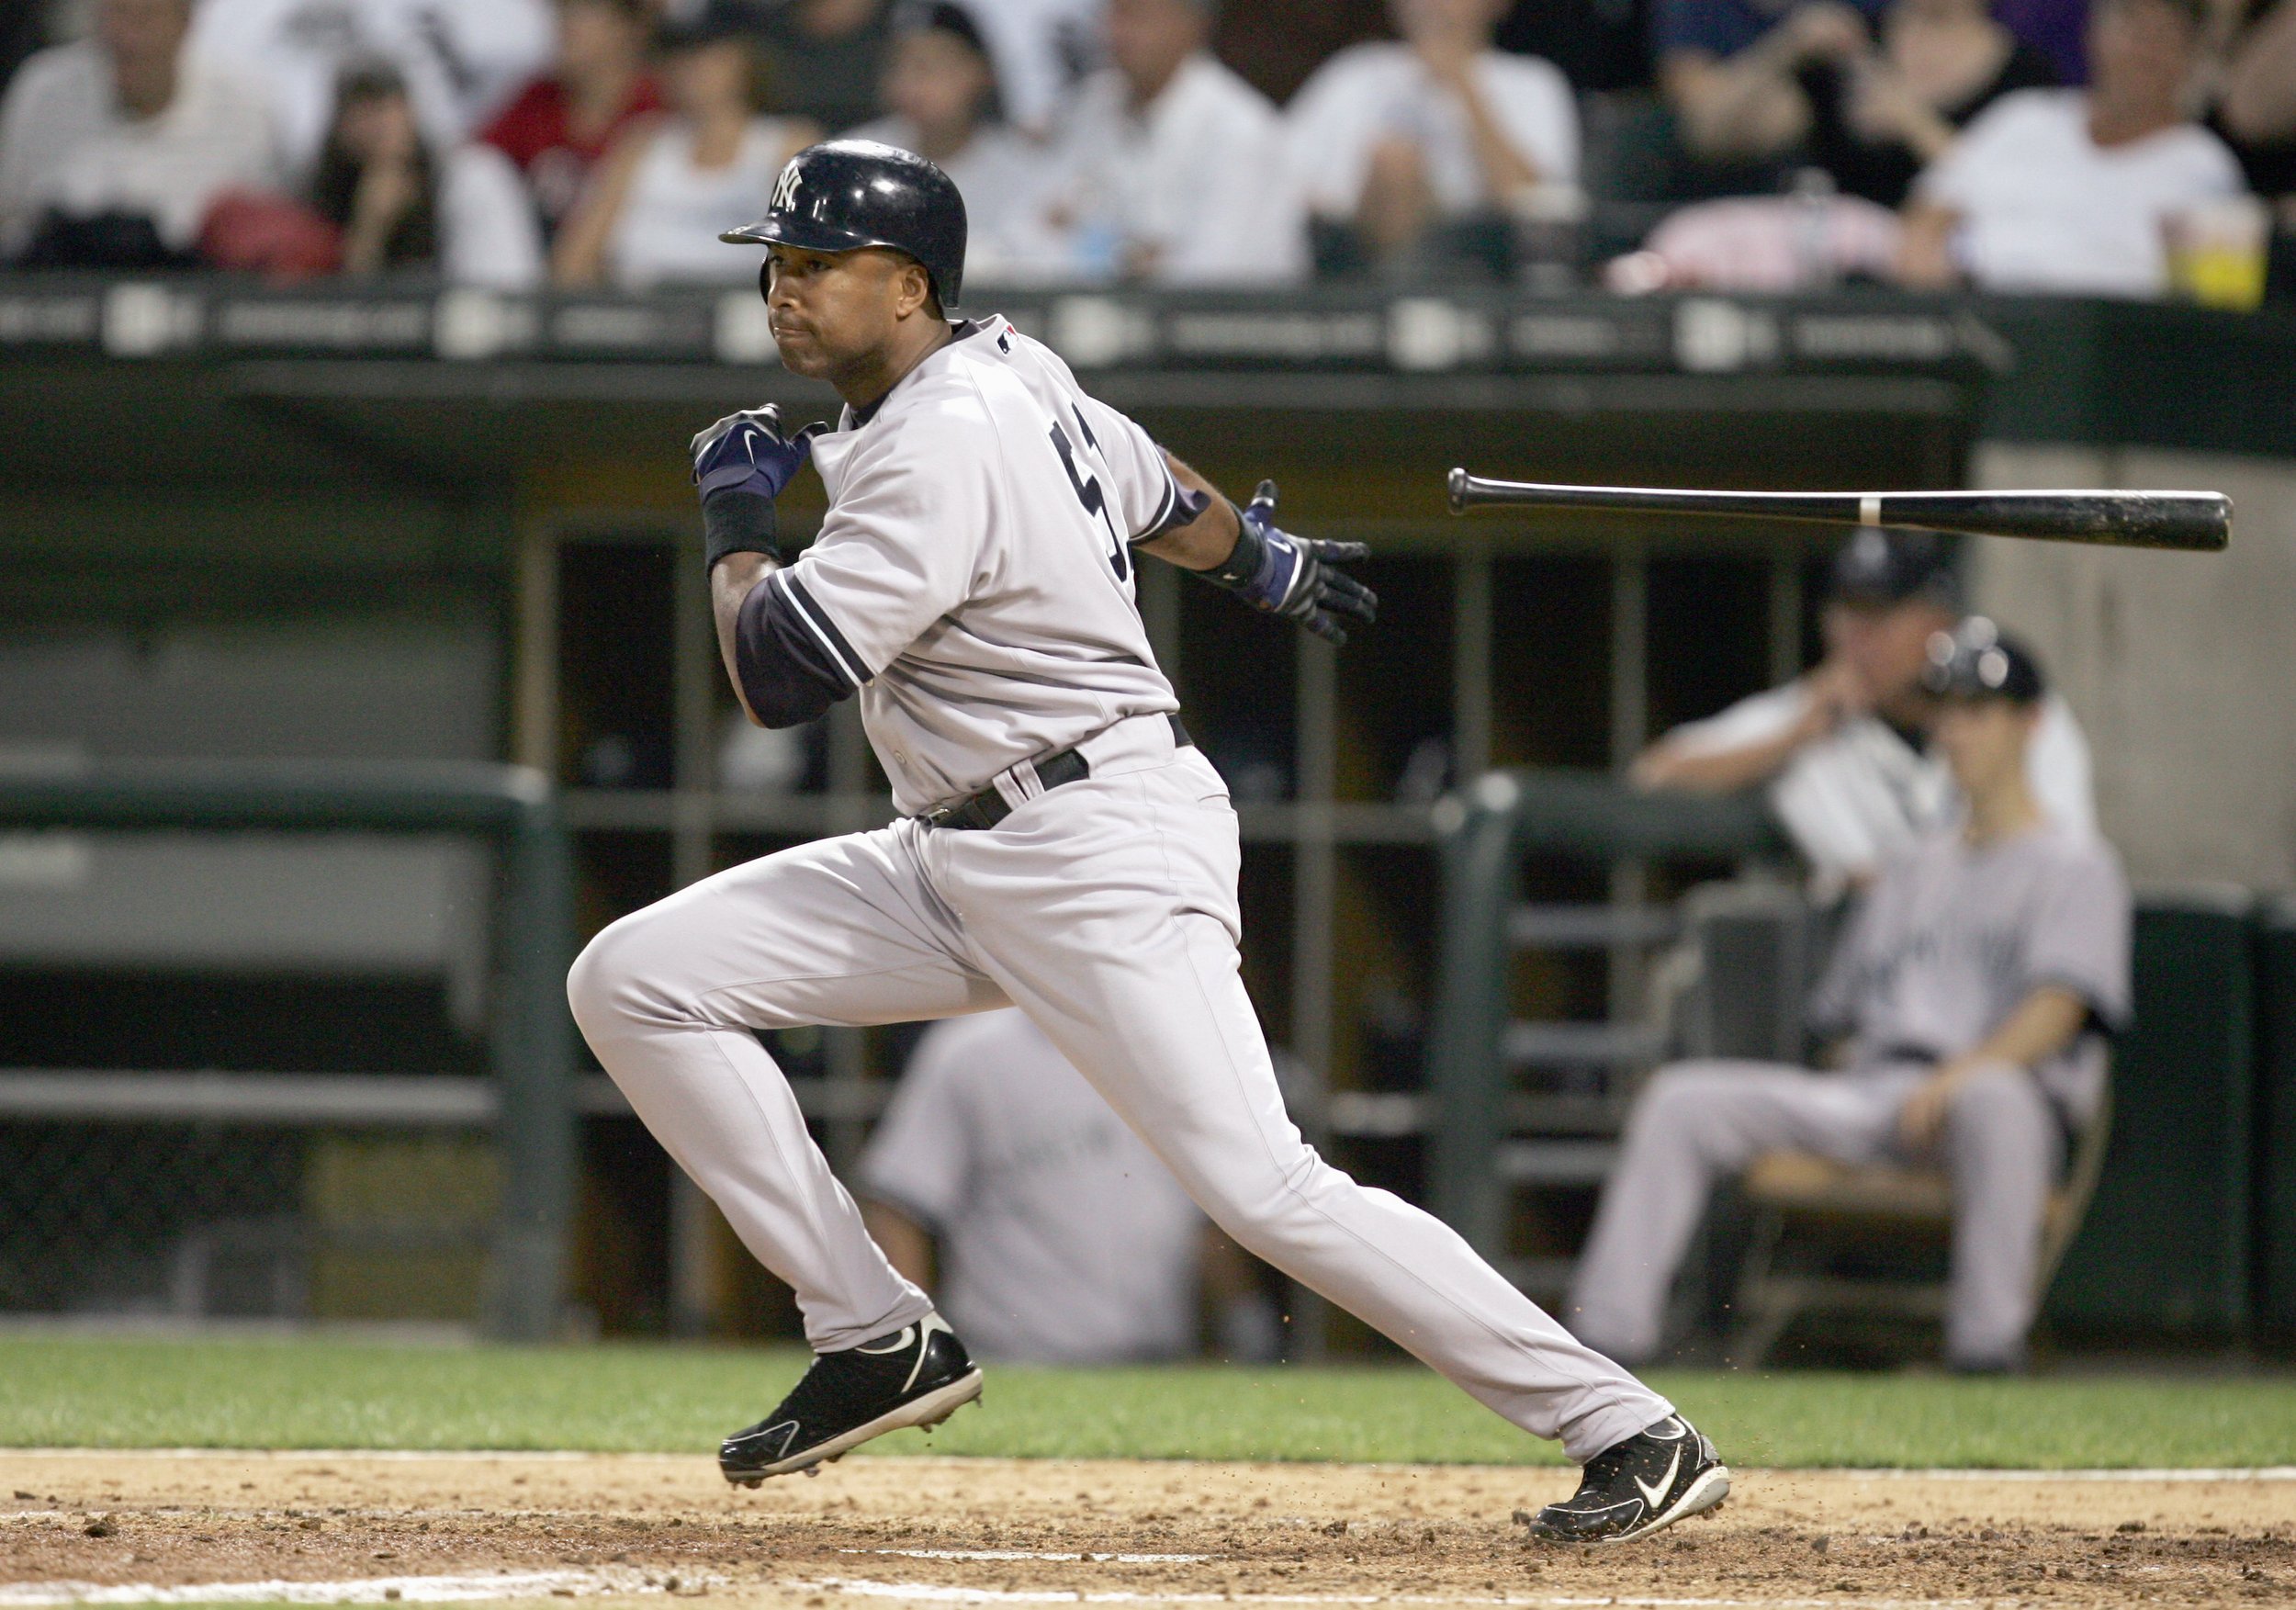 BERNIE WILLIAMS New York Yankees Great — Crave the Auto